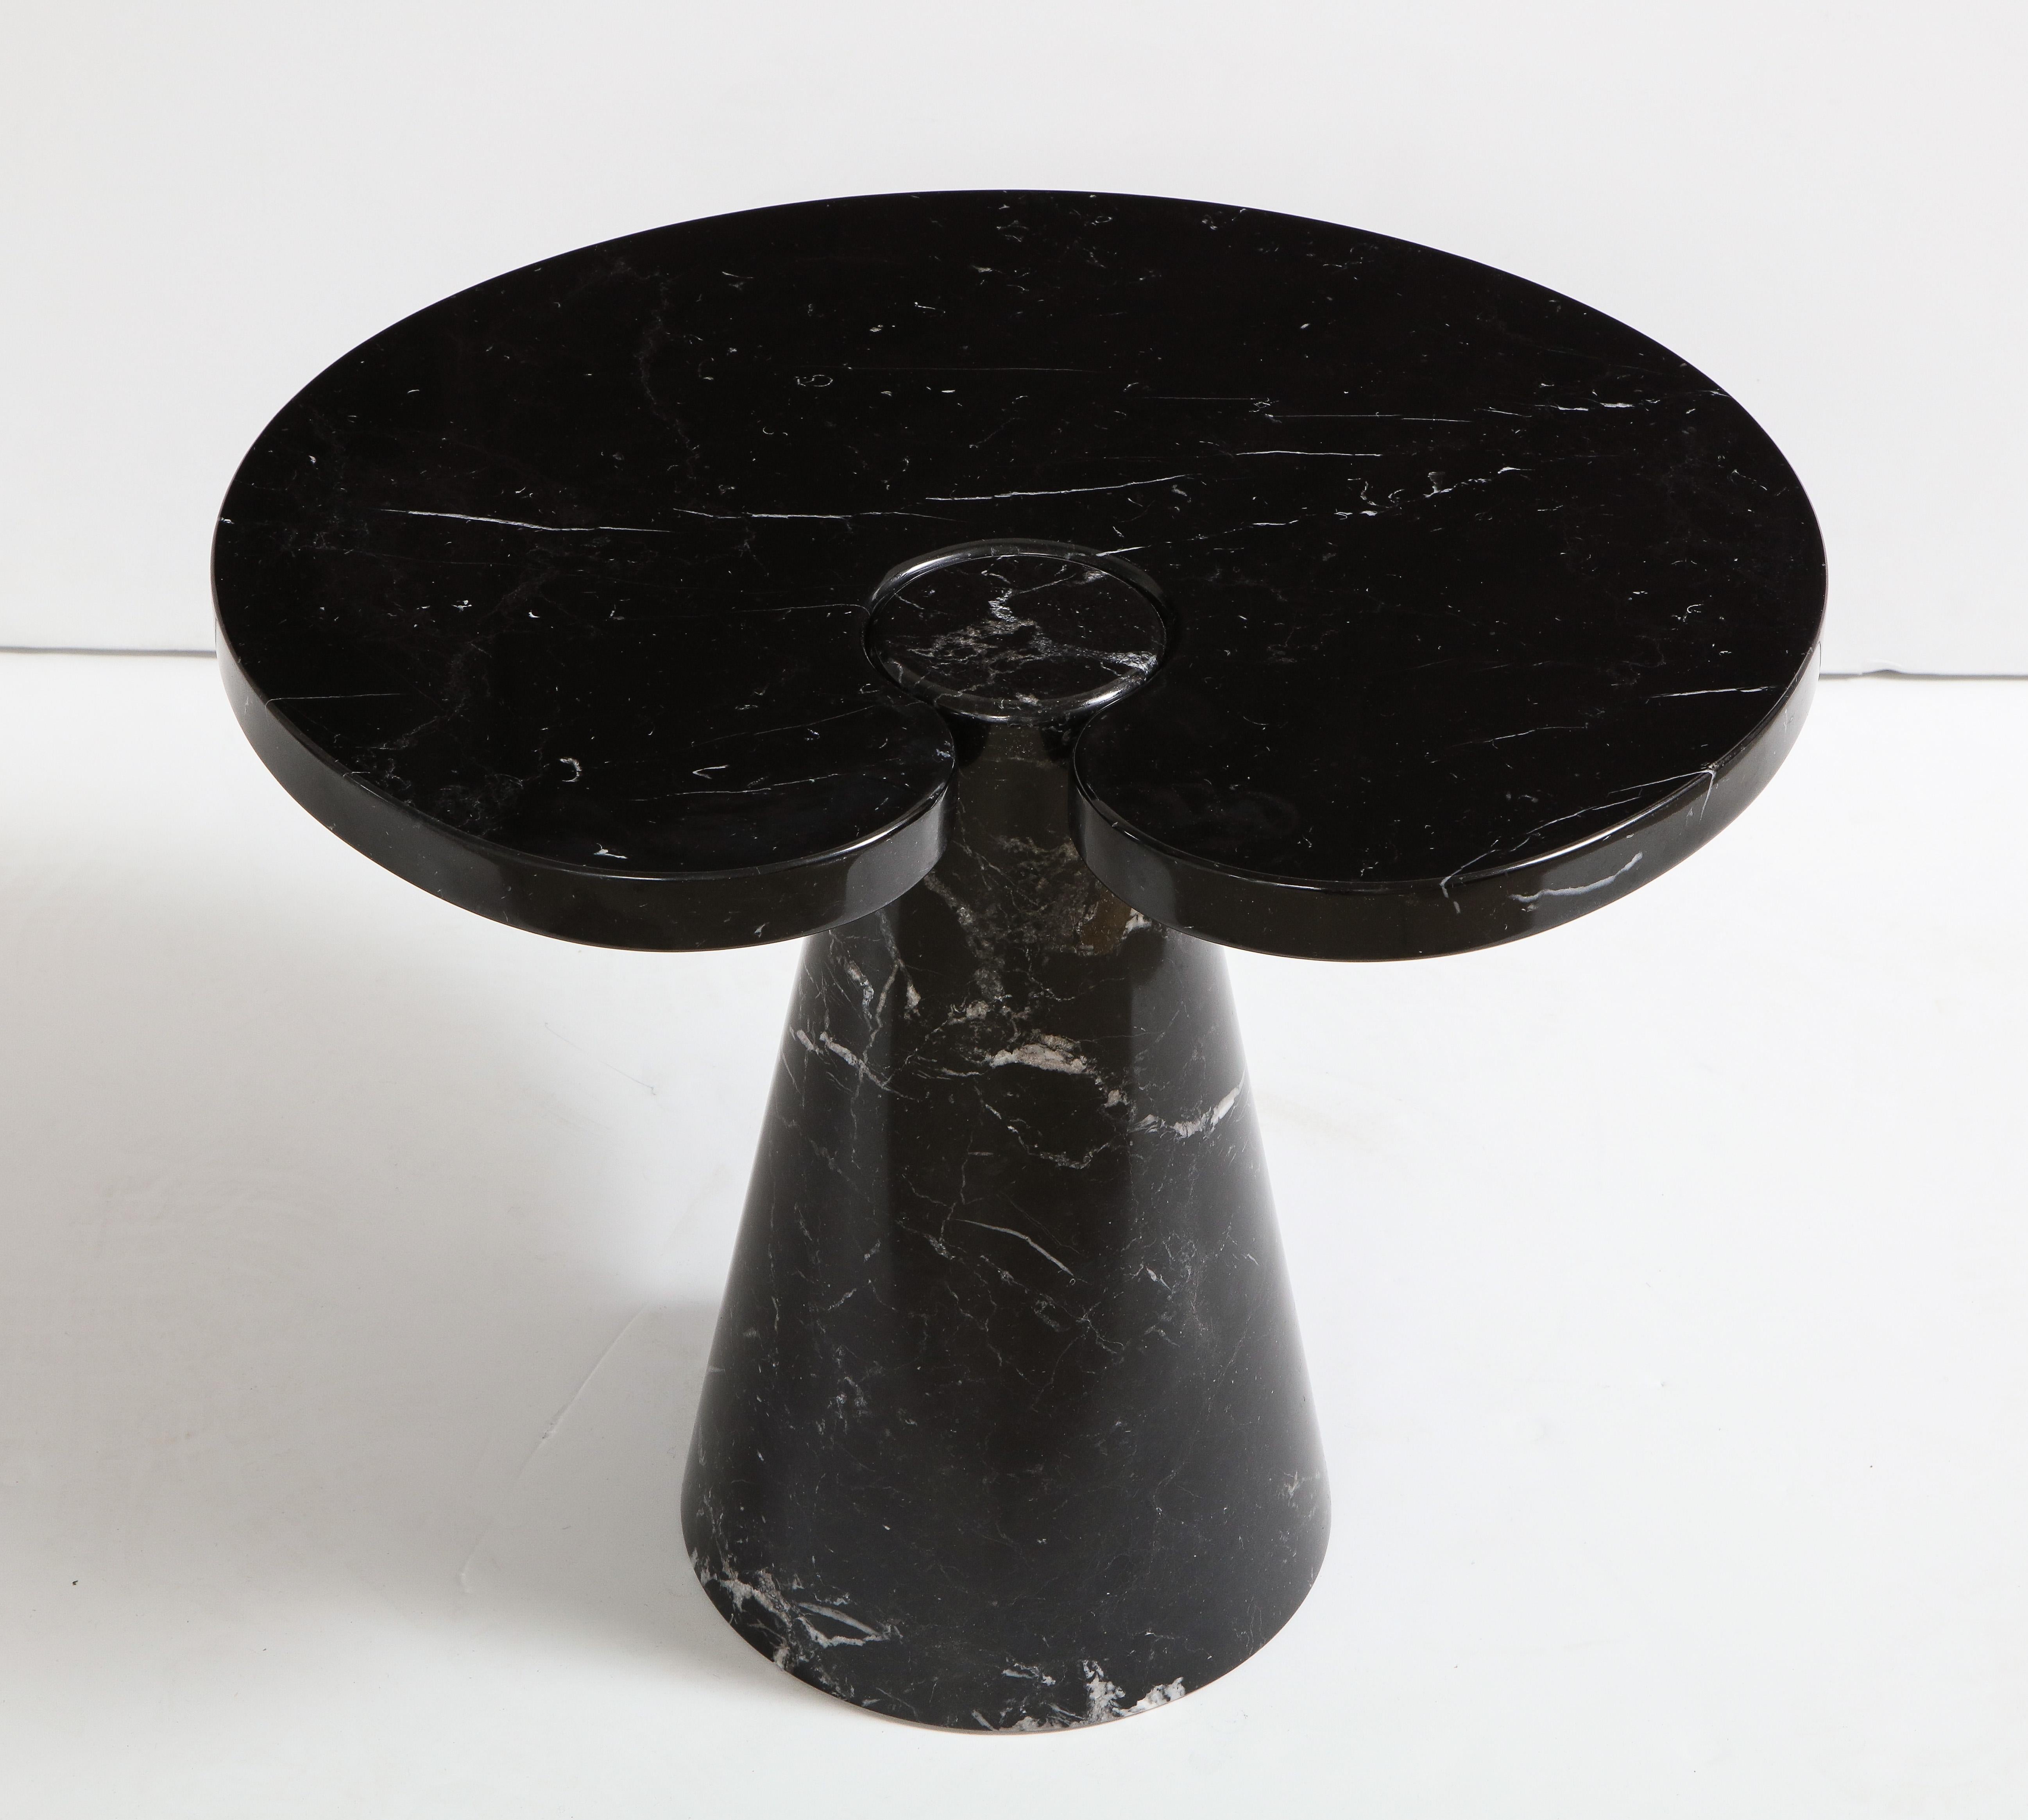 Designed by Angelo Mangiarotti for Skipper from the 'Eros' series, black Marquina marble side table with top fitted on conical base. This elegantly organic table has beautiful subtle veining throughout and is from the original 1971 production for